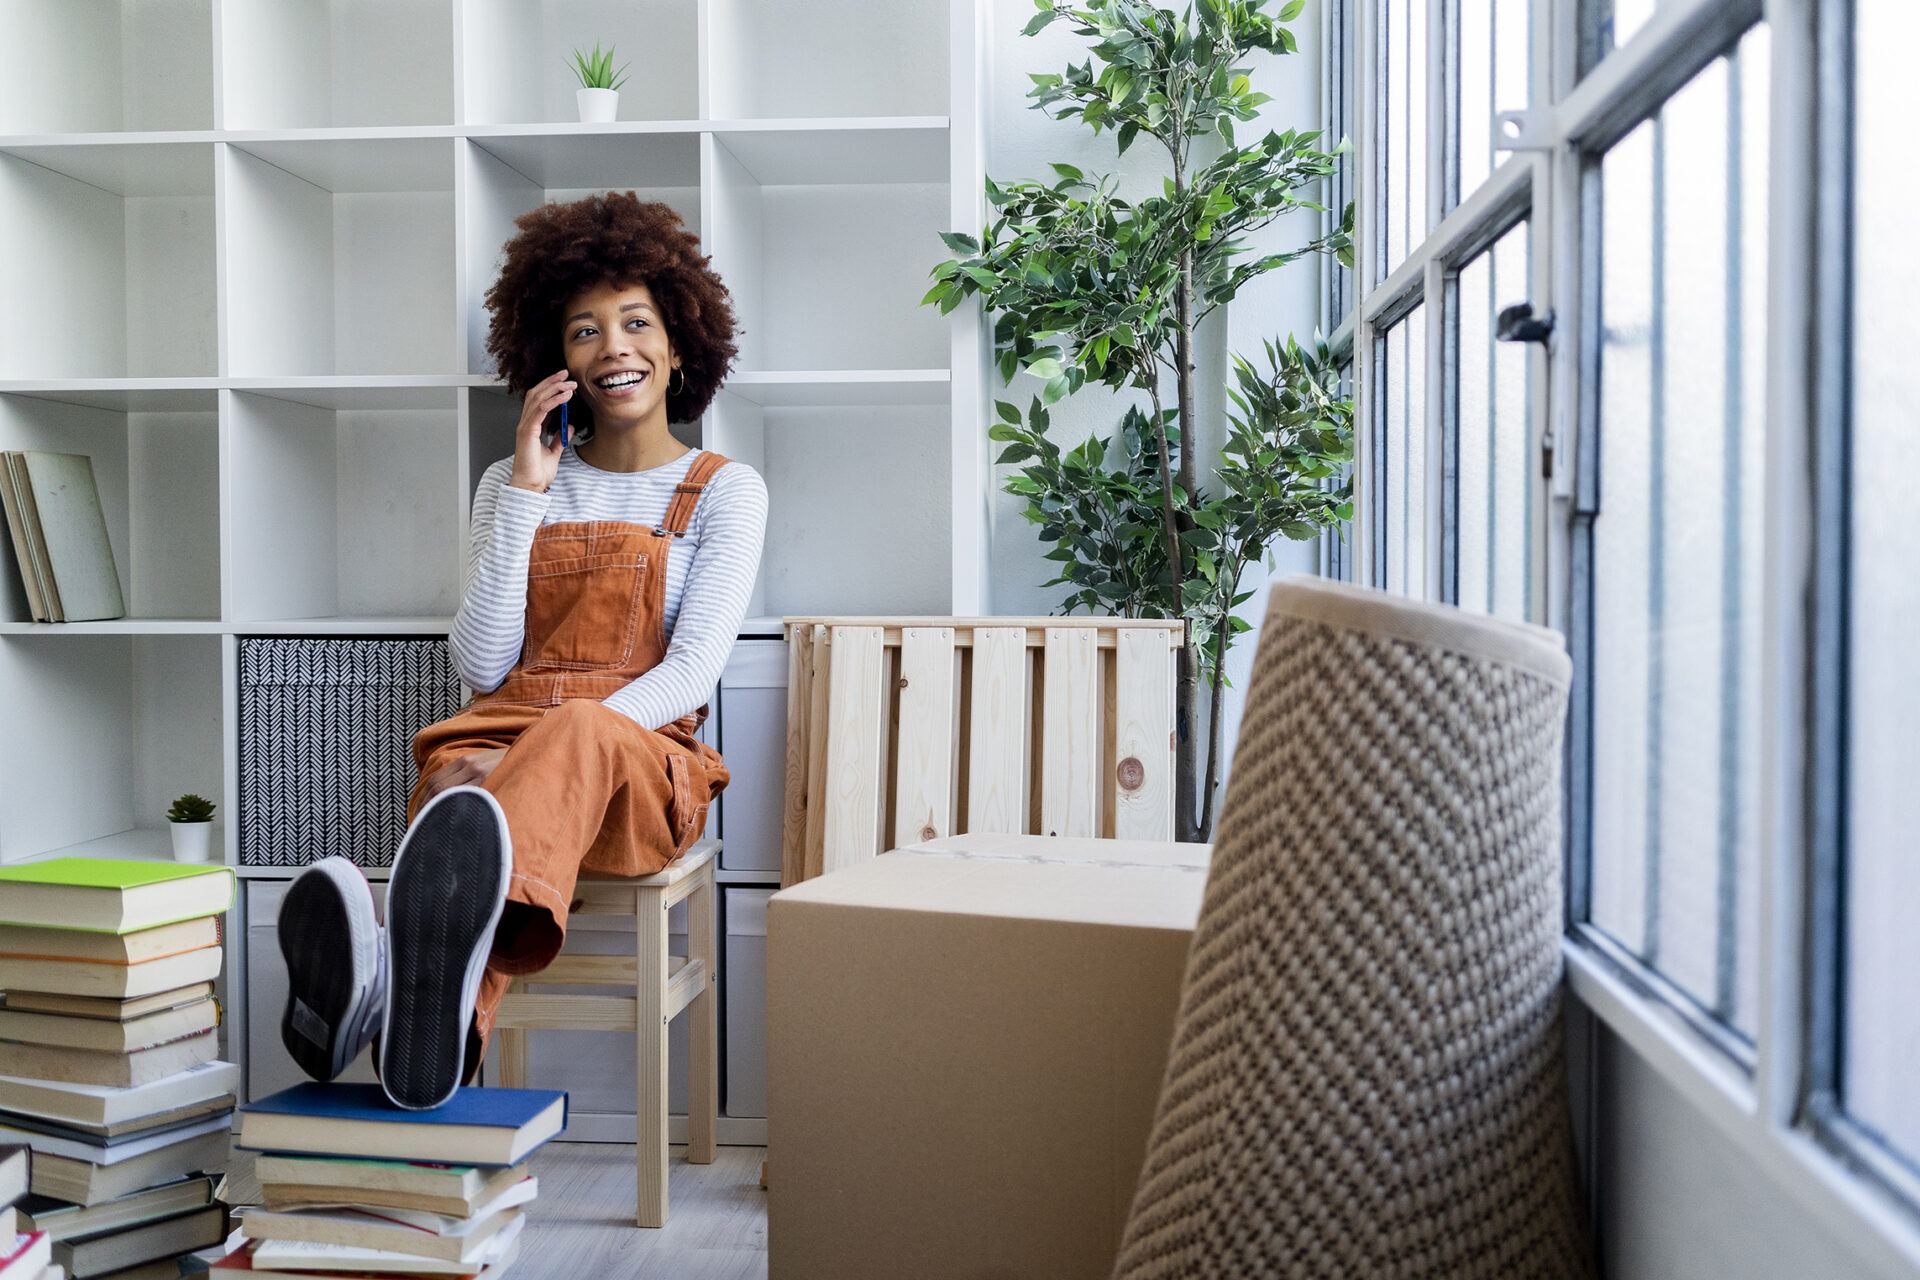 Afro woman talking on smart phone while sitting against bookshelf in new apartment